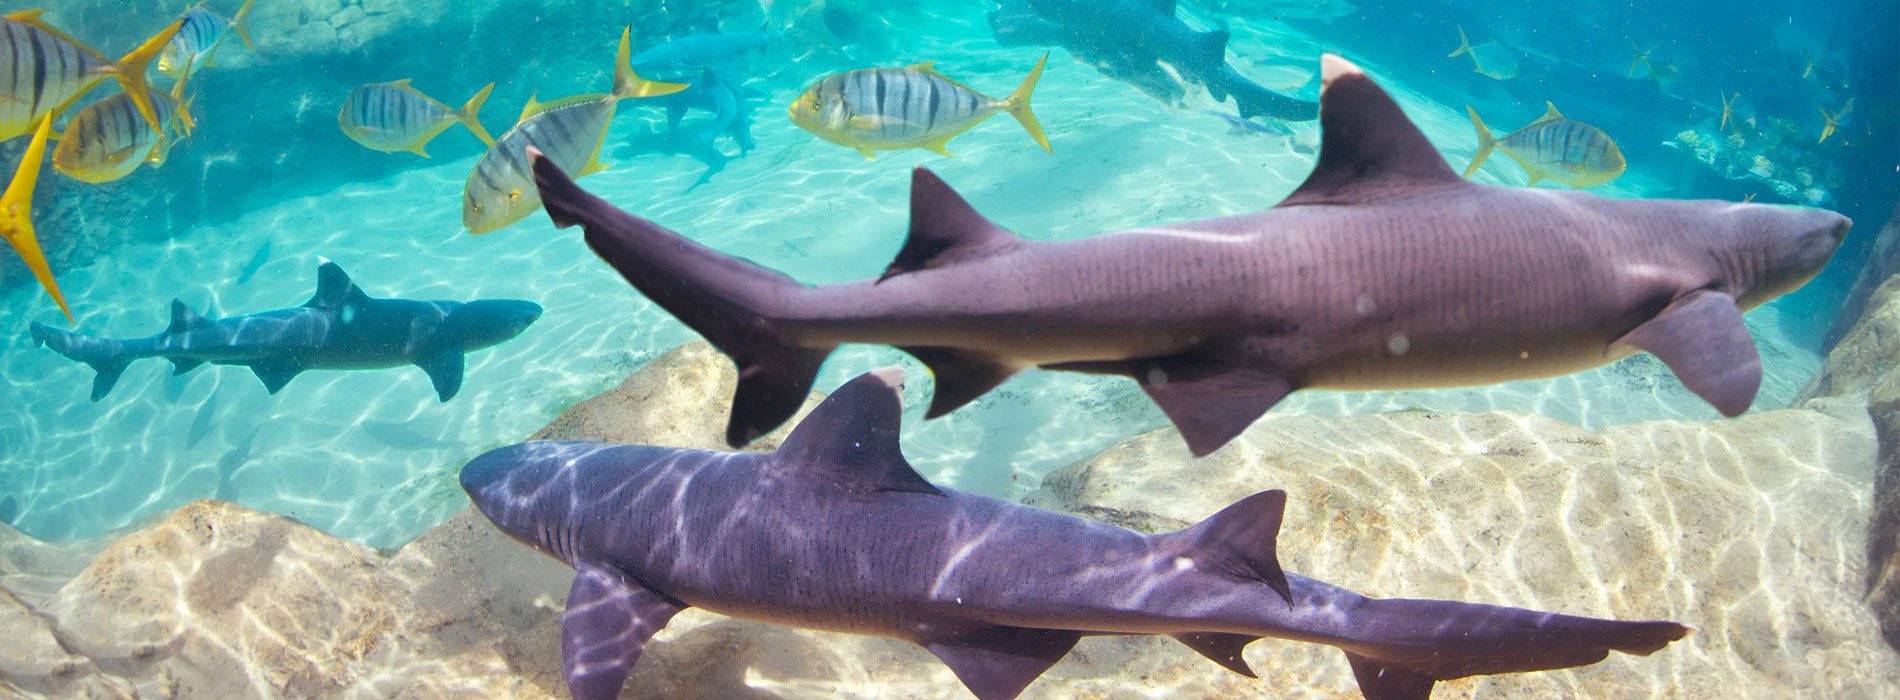 Swim with sharks at Discovery Cove